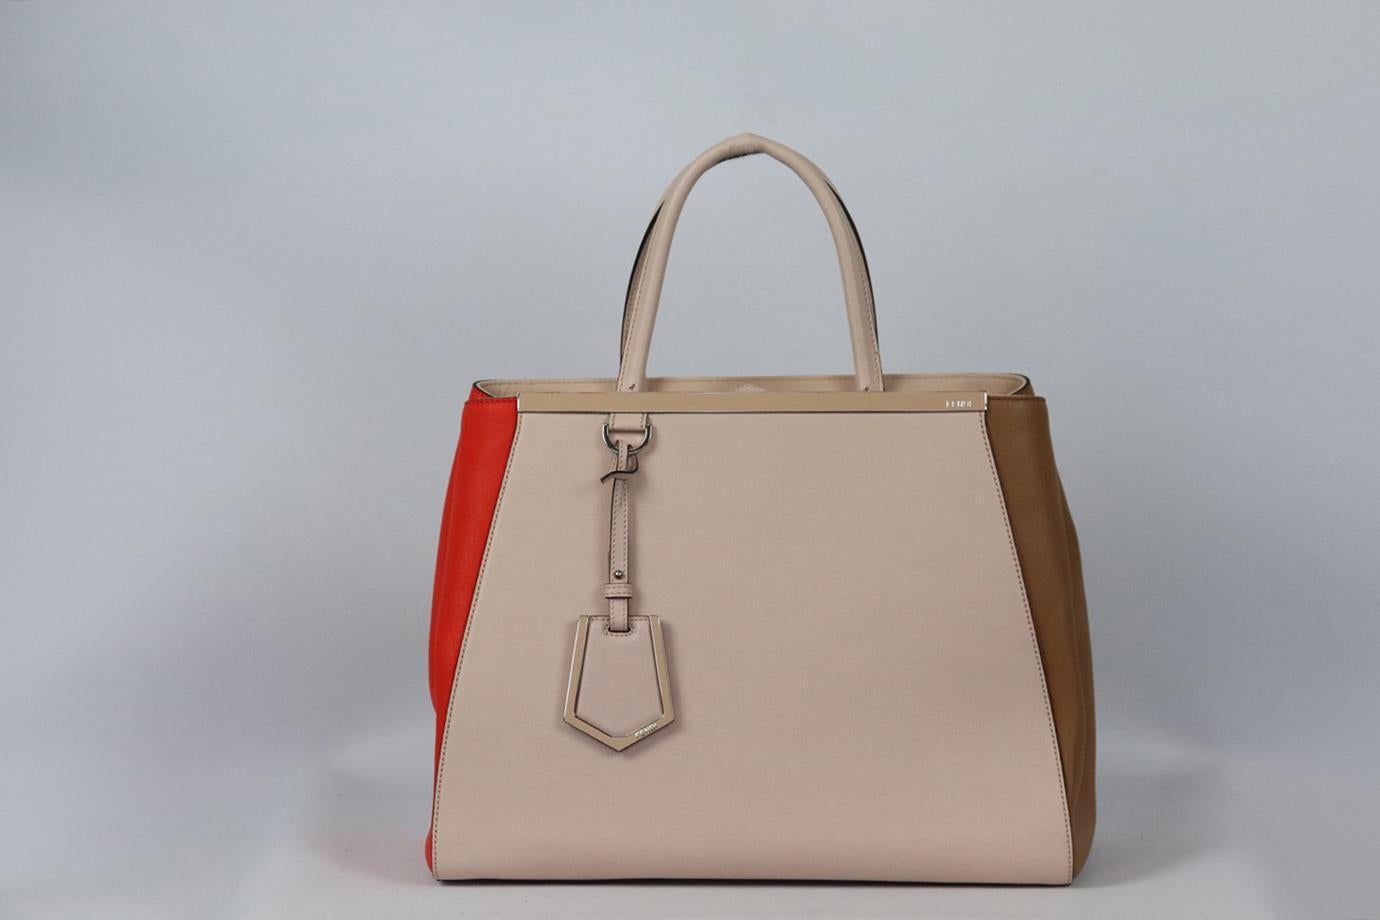 Fendi 2Jours medium textured leather tote bag. Pink, orange and brown. Snap button at top. Does not come with dustbag or box. Height: 11 in. Width: 13.9 in. Depth: 6.5 in. Handle Drop: 5.2 in. Strap Drop: 13 in. Good condition - Some cracking and